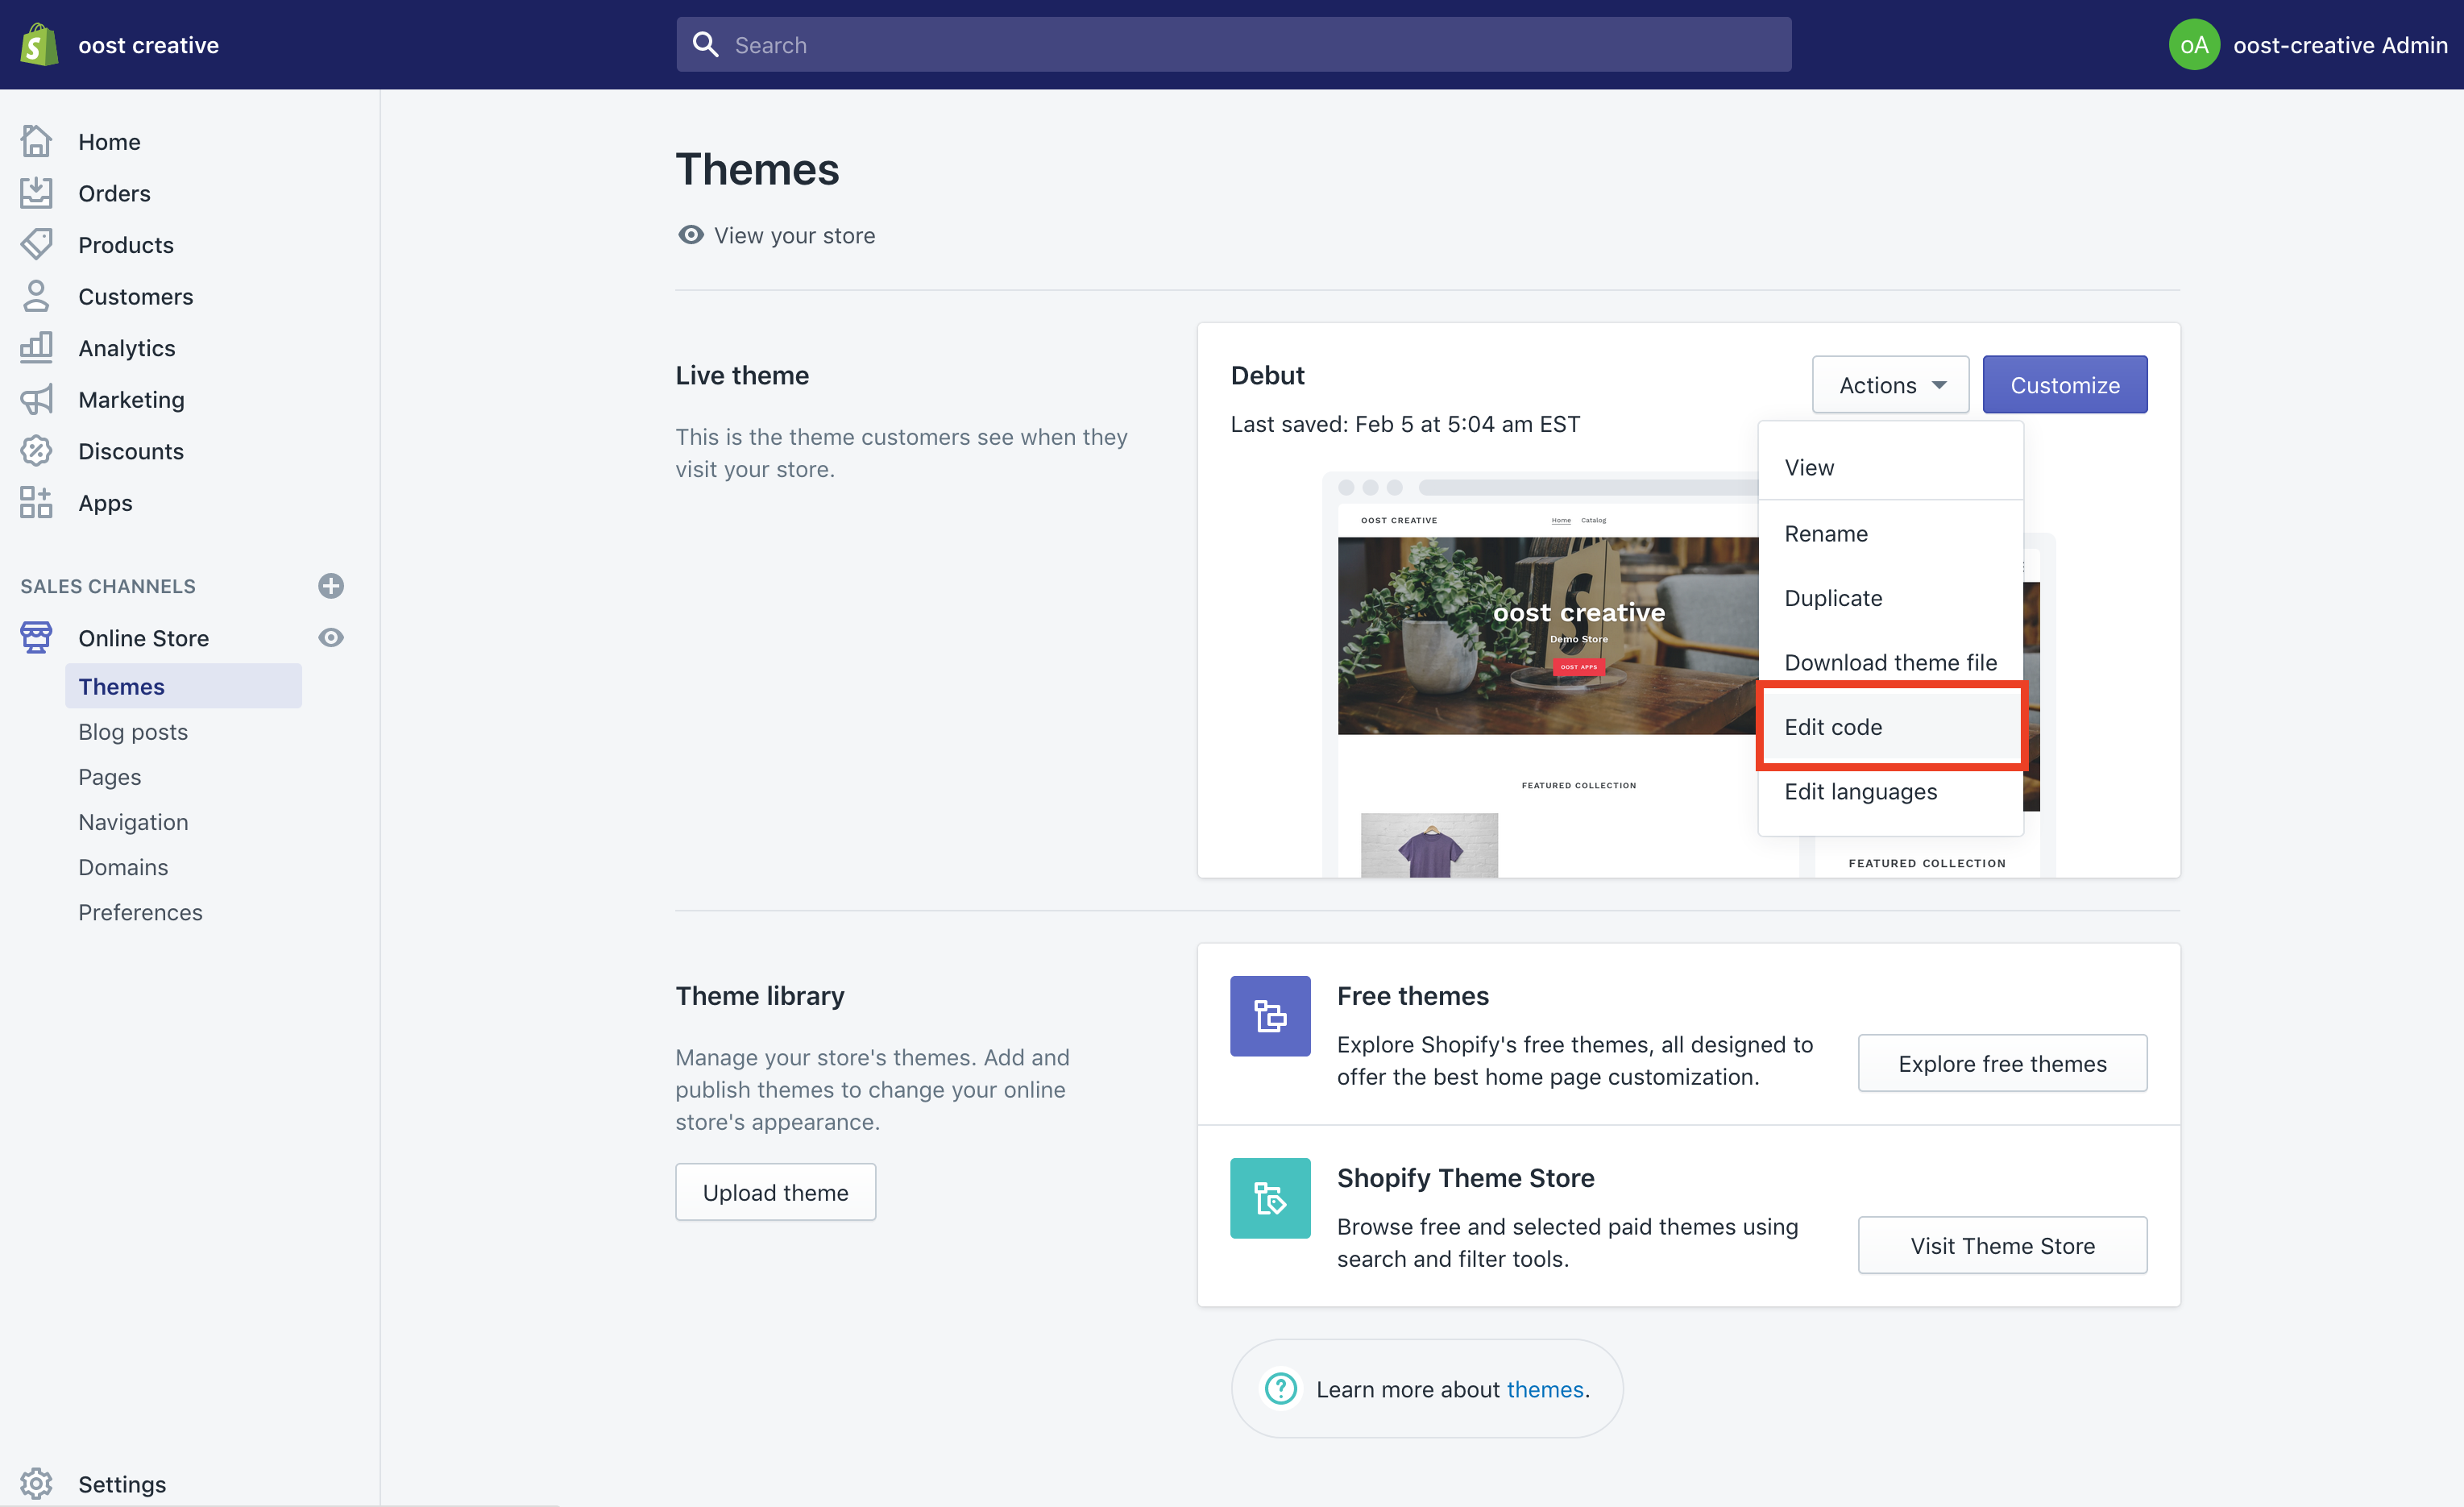 Shopify admin page showing the active theme